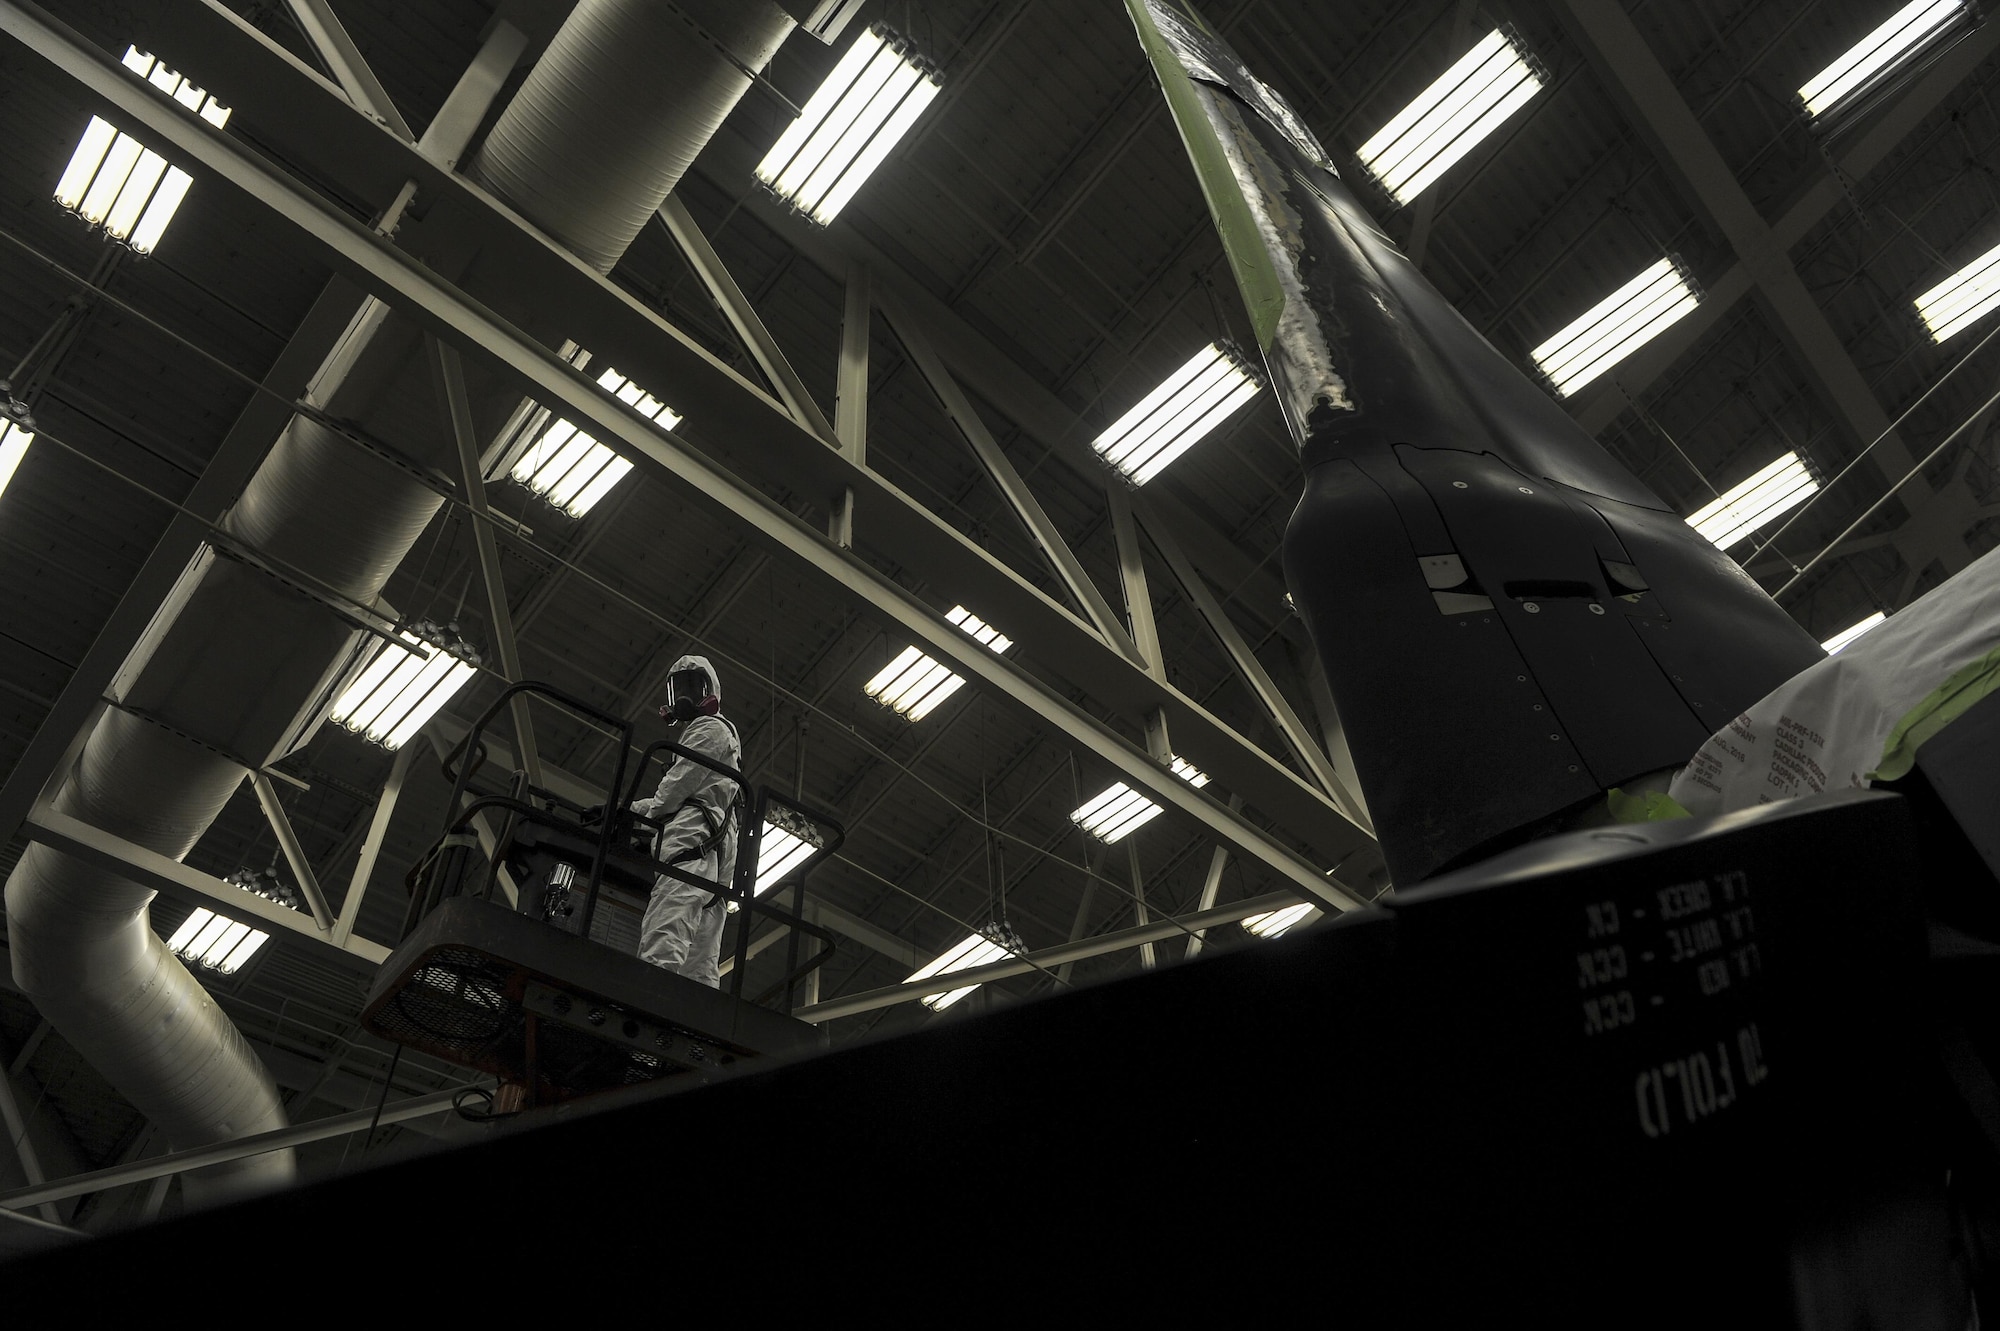 Airman 1st Class Logan Winningham, an aircraft structural maintainer with the 1st Special Operations Maintenance Squadron, uses a lift to get in position to spray primer onto a CV-22 Osprey propeller at Hurlburt Field, Fla., March 29, 2017. Primer is applied after the old paint is sanded and wiped away. (U.S. Air Force photo by Airman 1st Class Isaac O. Guest IV)